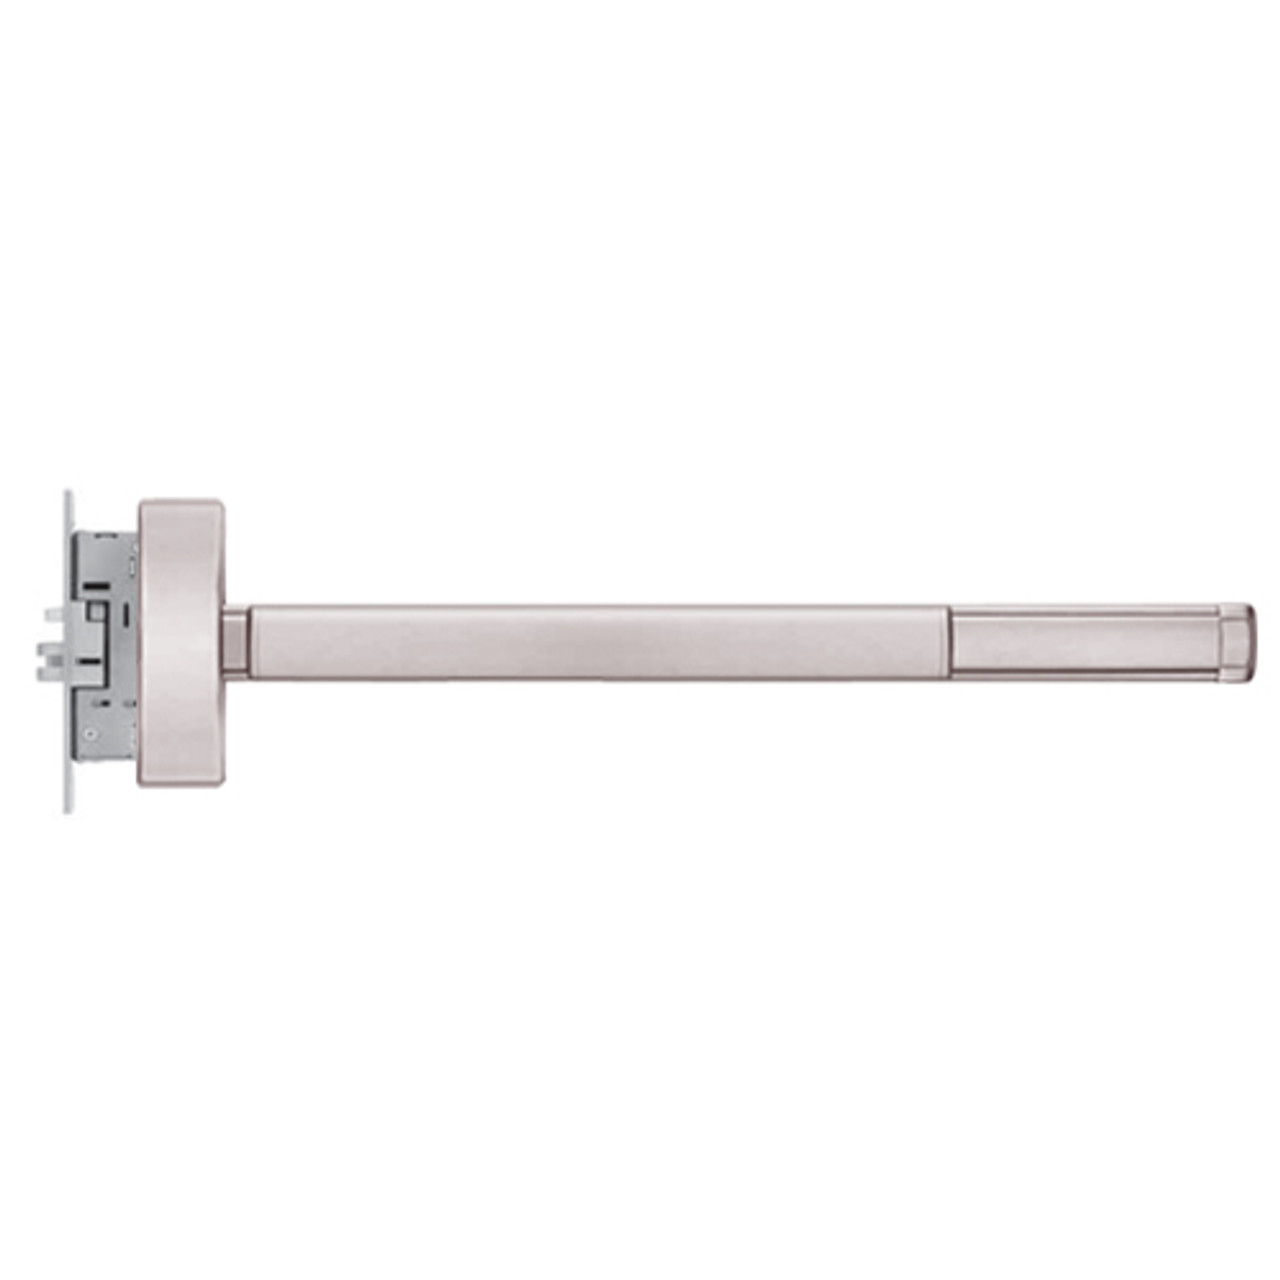 MLR2308-LHR-628-48 PHI 2300 Series Apex Mortise Exit Device with Motorized Latch Retraction Prepped for Key Controls Lever/Knob in Satin Aluminum Finish